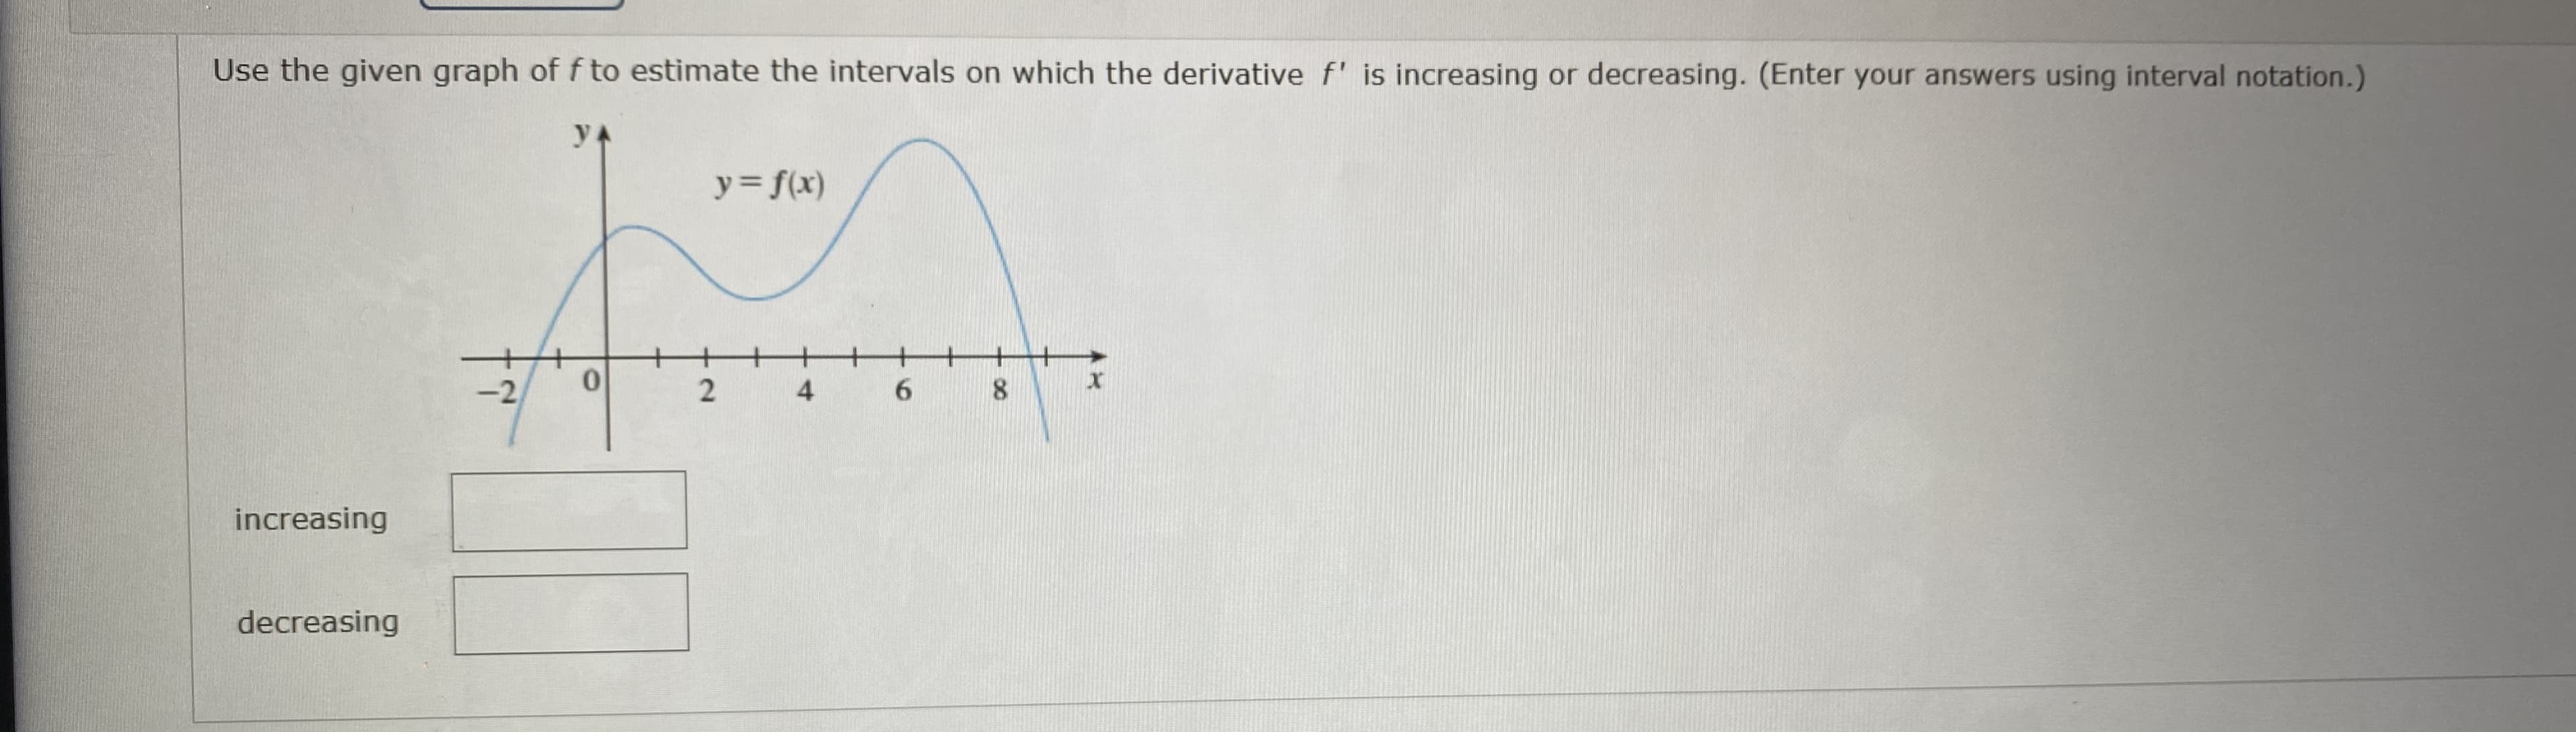 Use the given graph of f to estimate the intervals on which the derivative f' is increasing or decreasing. (Enter your answers using interval notation.)
yA
y= f(x)
-2
4
increasing
decreasing
00
6
2.
